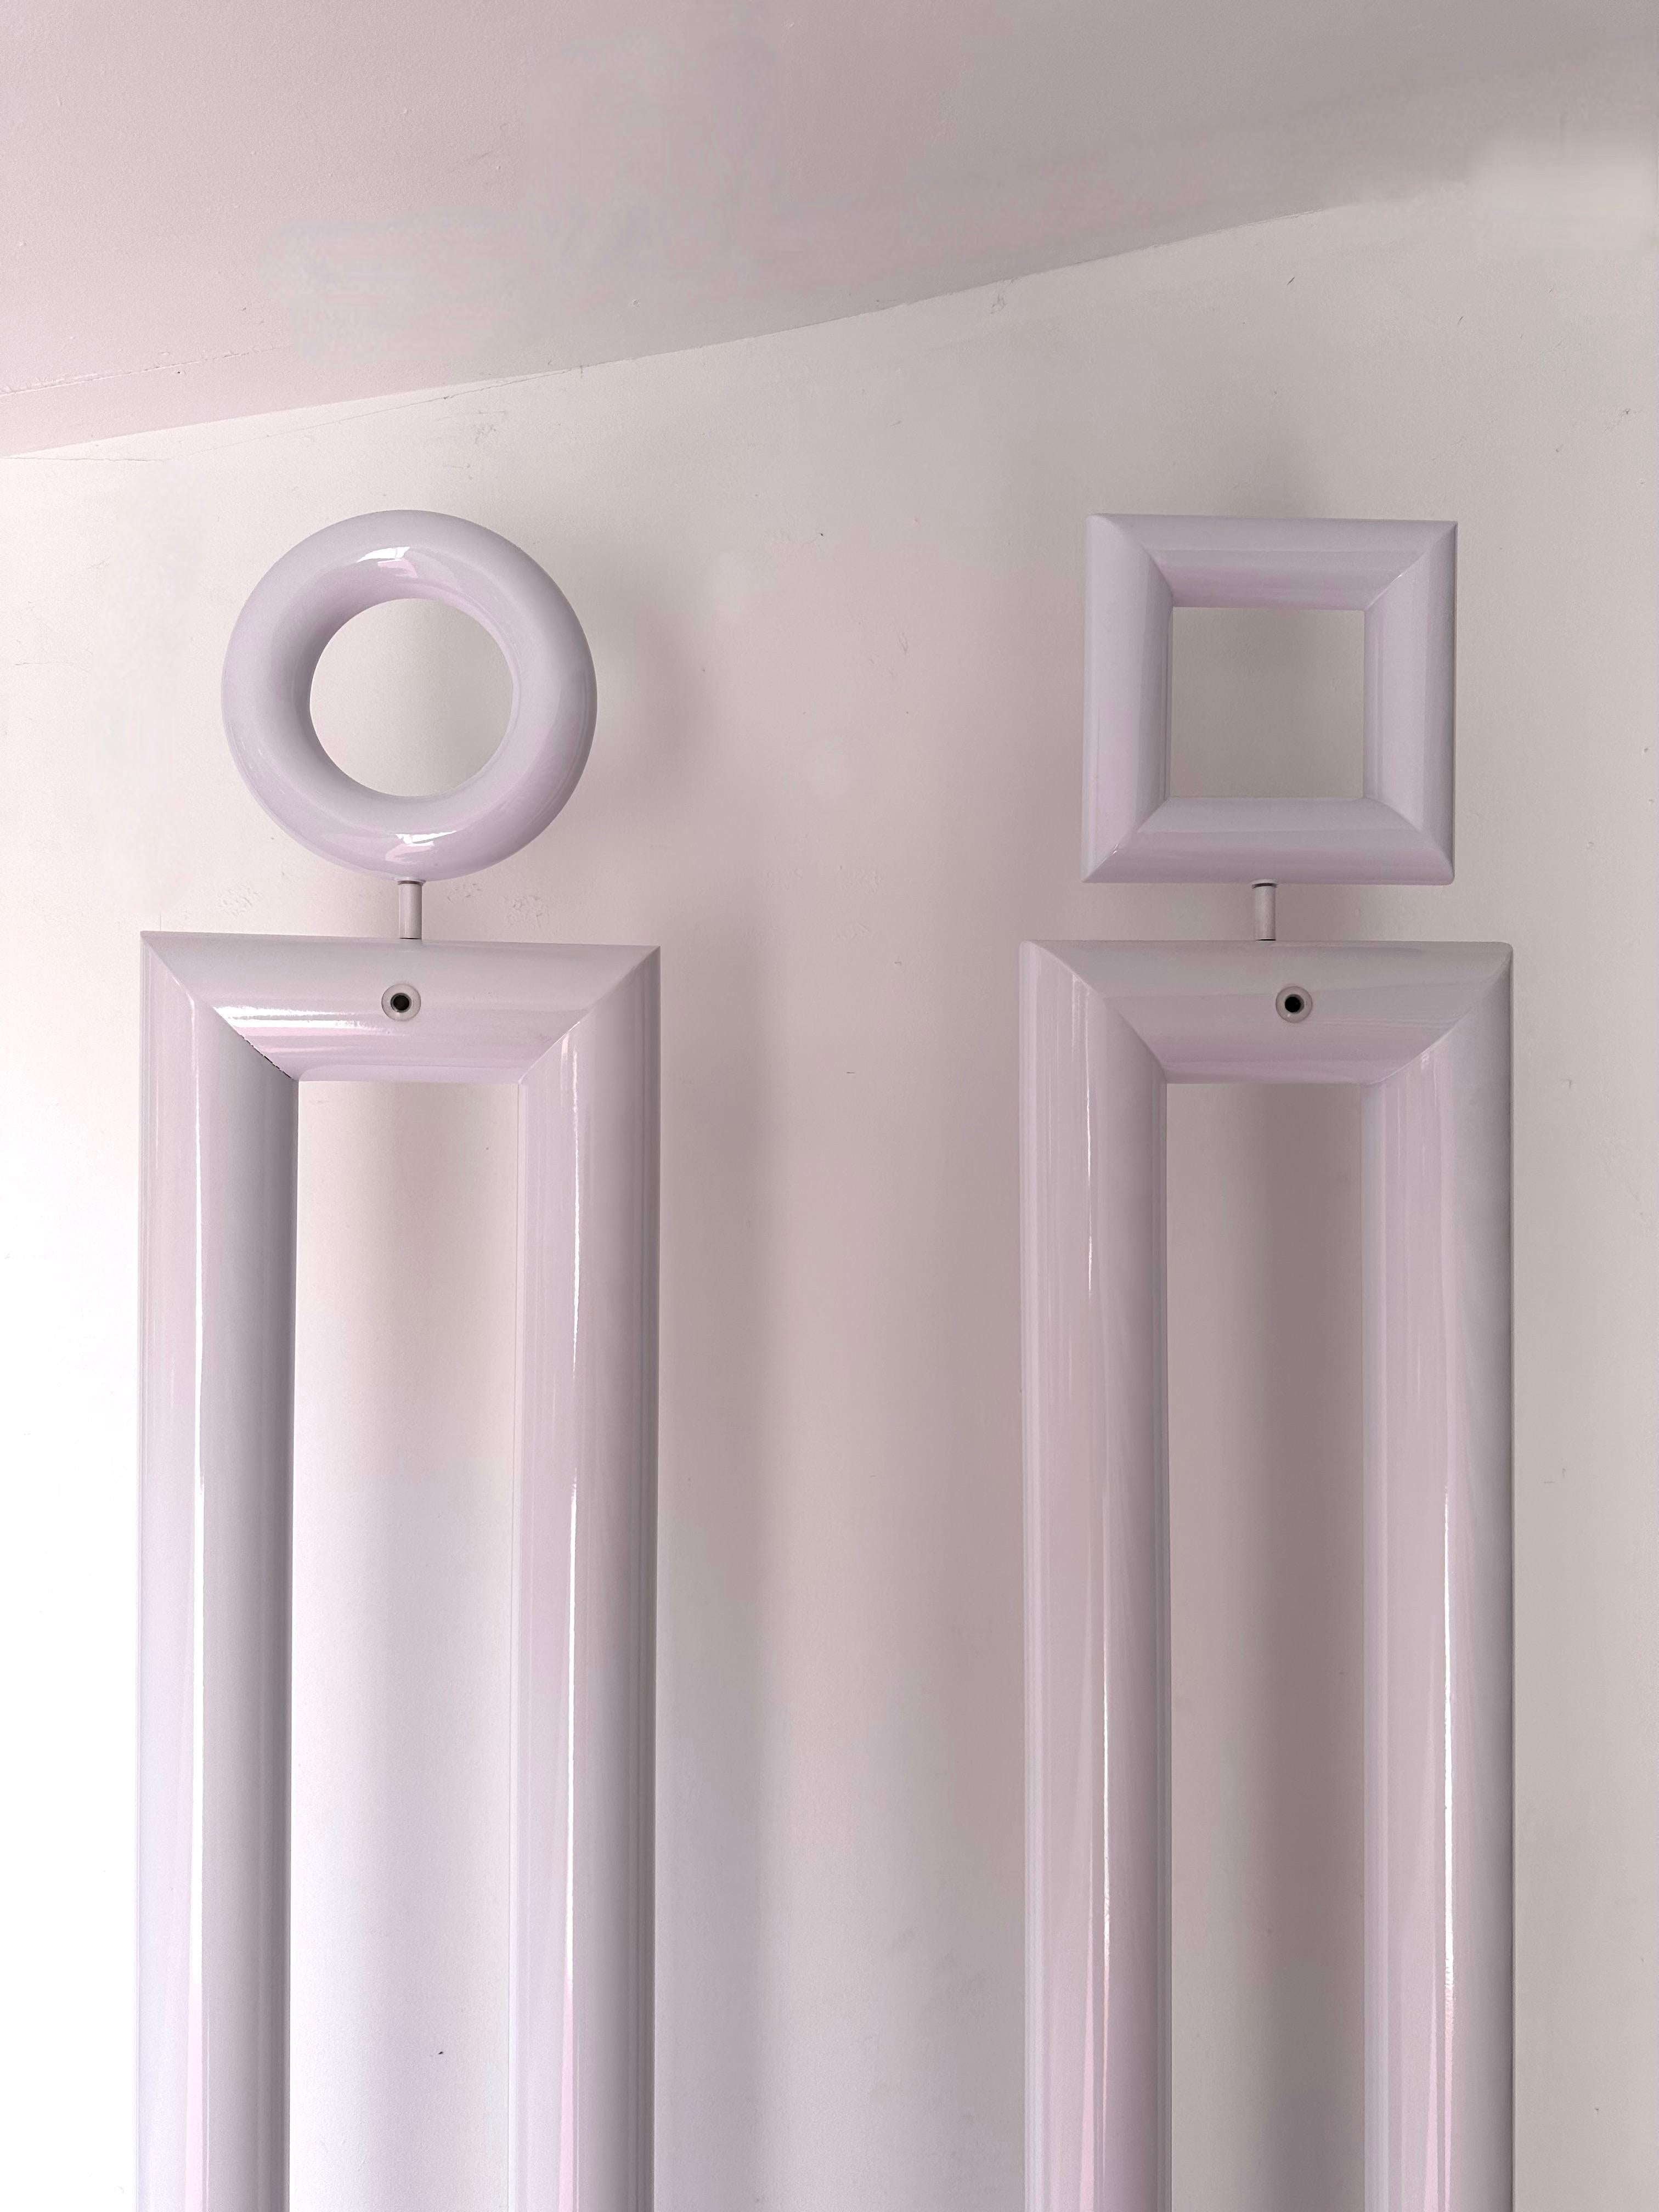 Rare pair of or set of 2 tall floor lamps boy and girl in white metal by the italian designer Remo Buti for the editor Neofos a division from Nordlight. Bibliography : The floor lamps were publicated in the famous design magazine Domus number 711